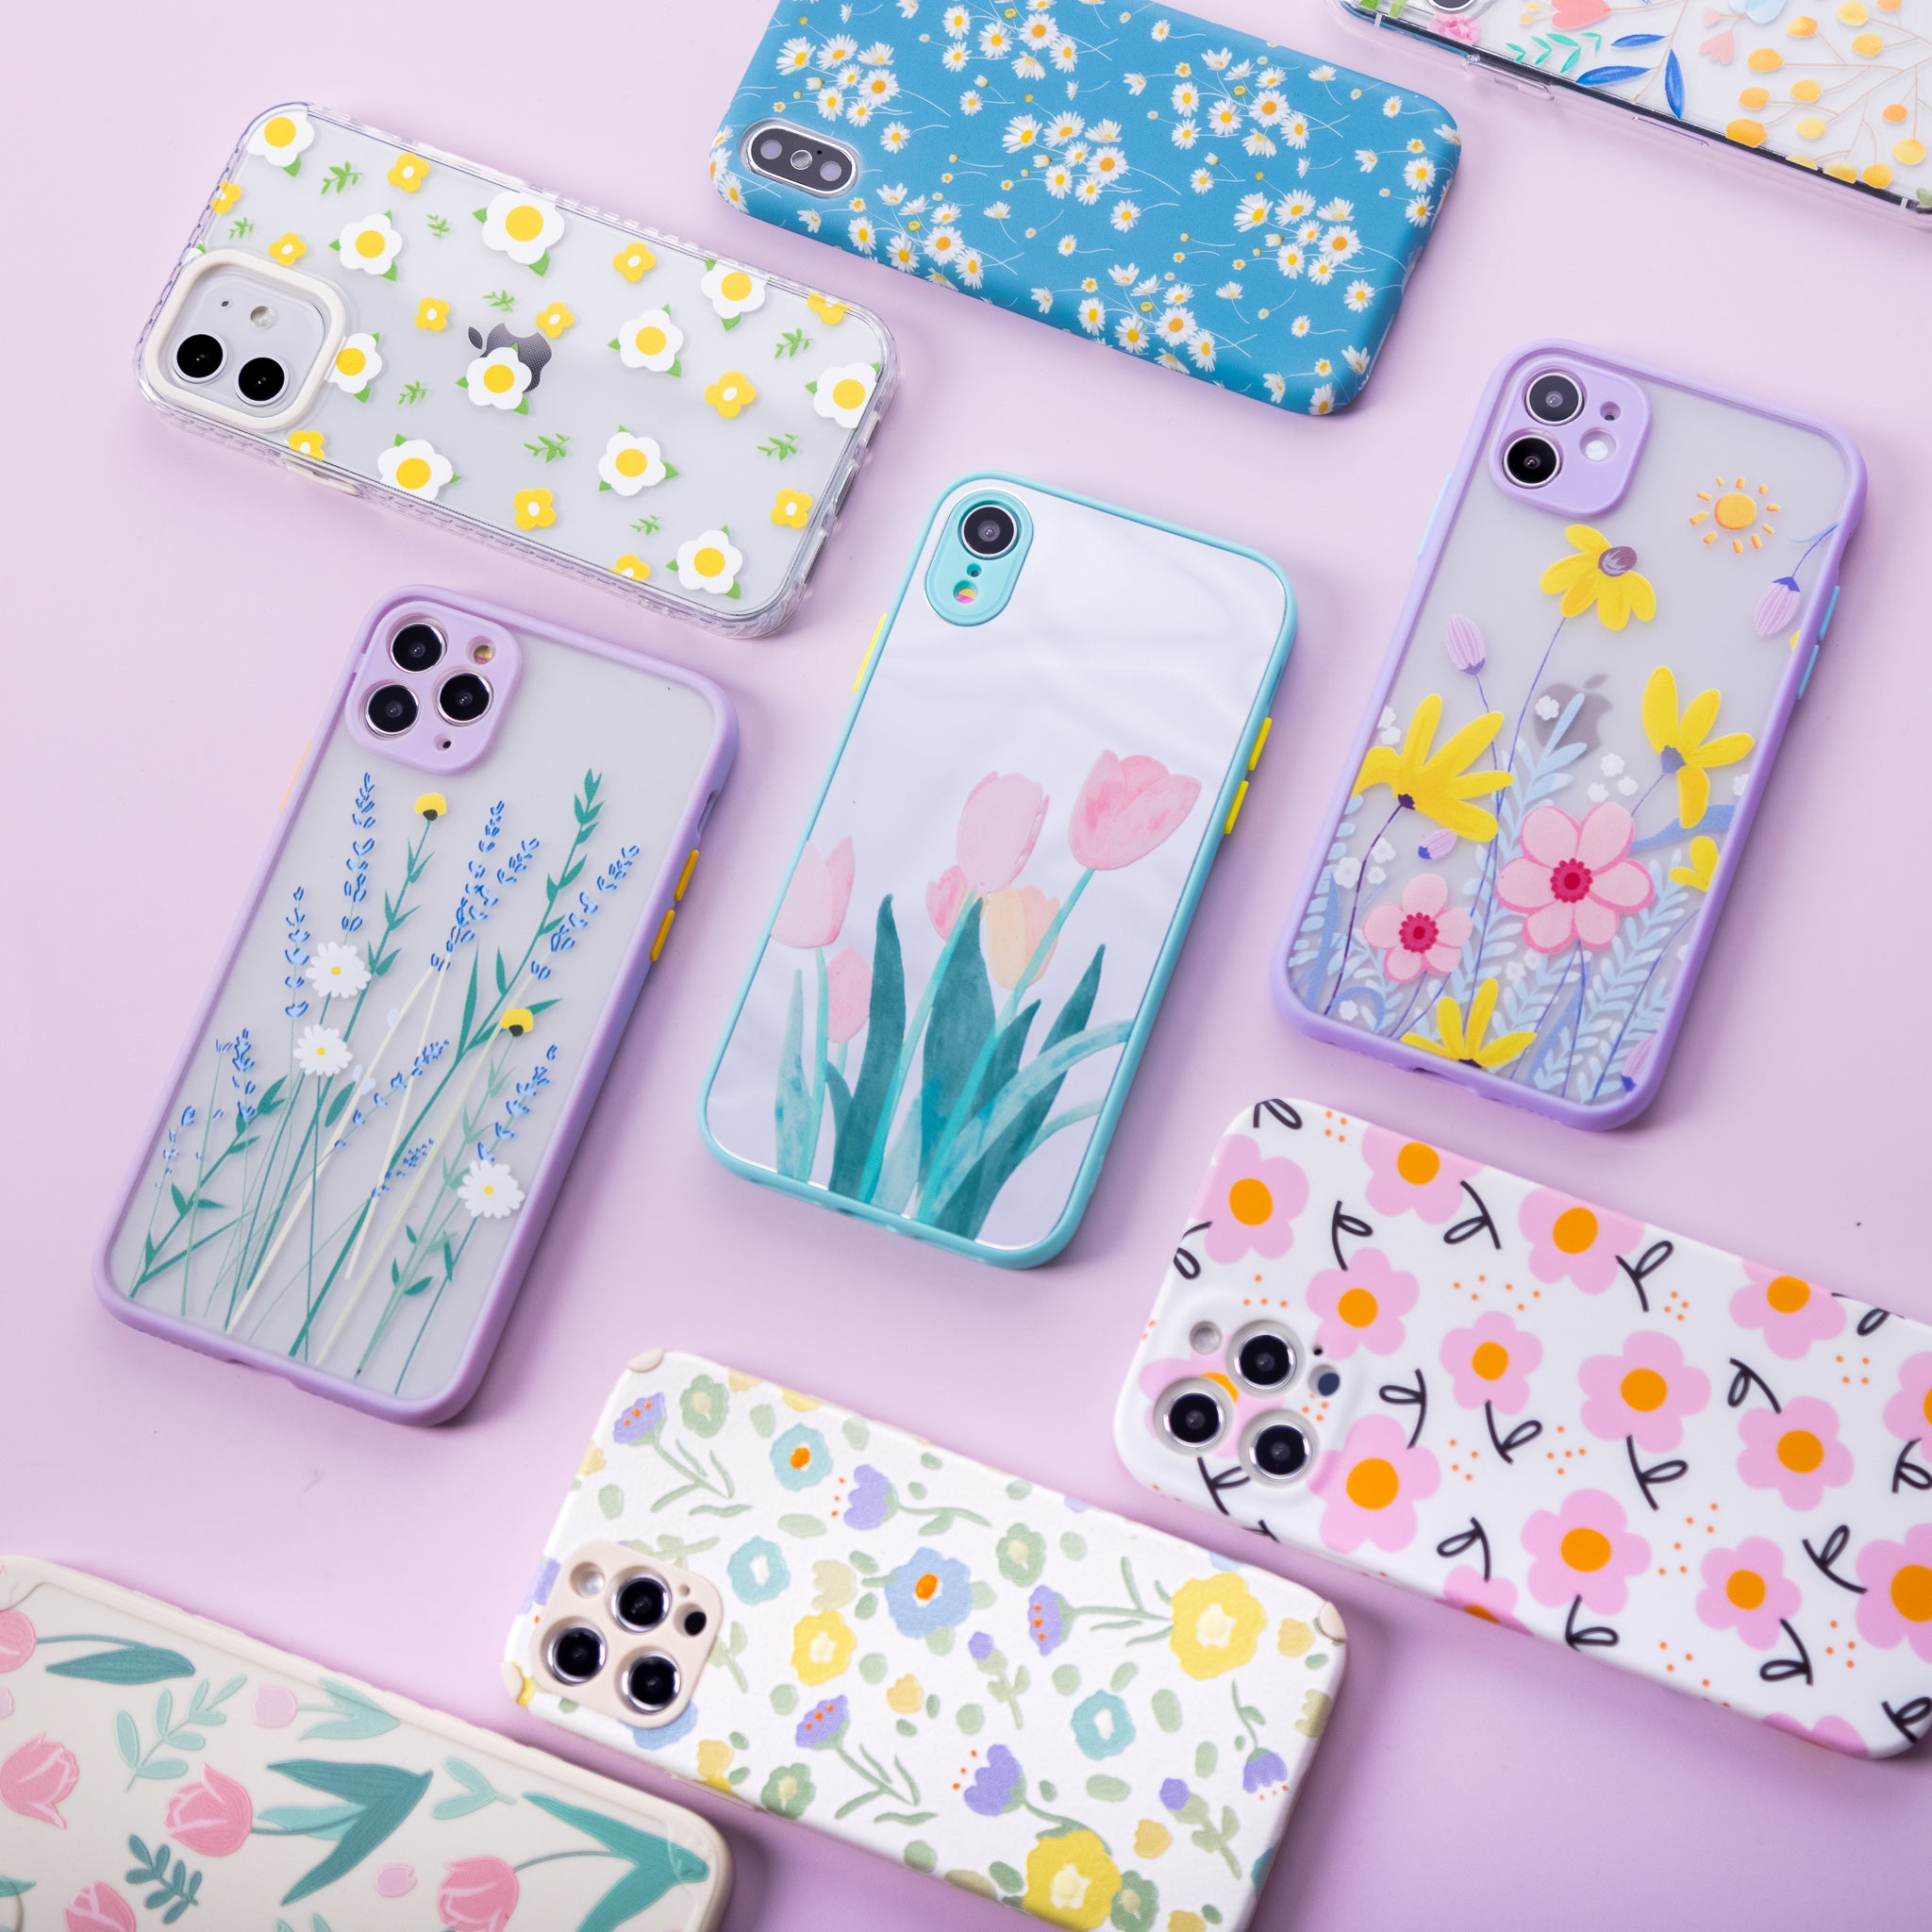 Floral iPhone cases